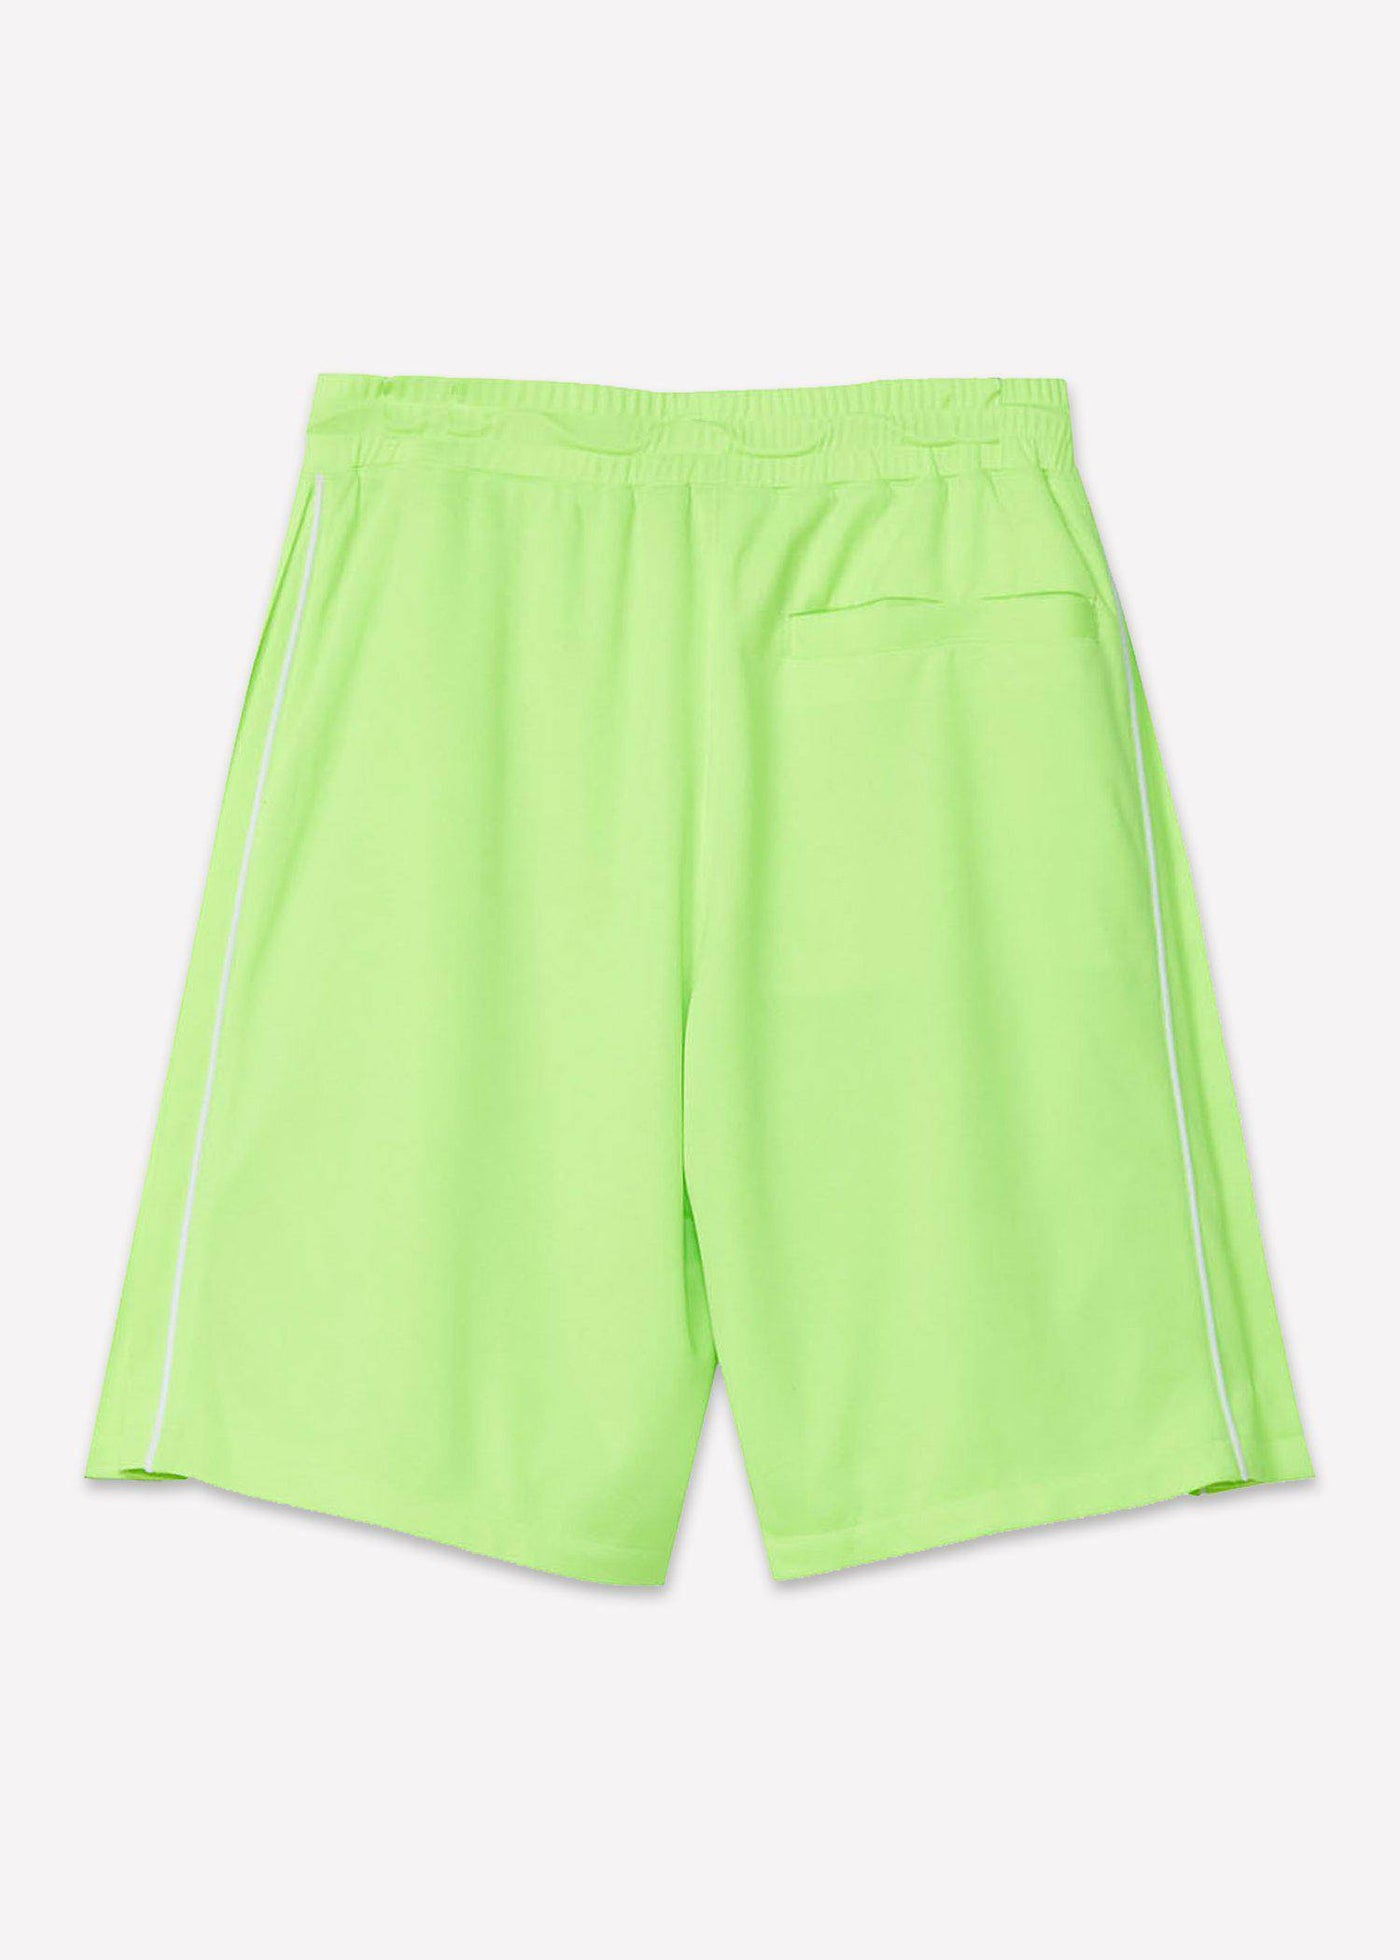 Blank State Men's Snap Button Gym Shorts in Neon by Shop at Konus